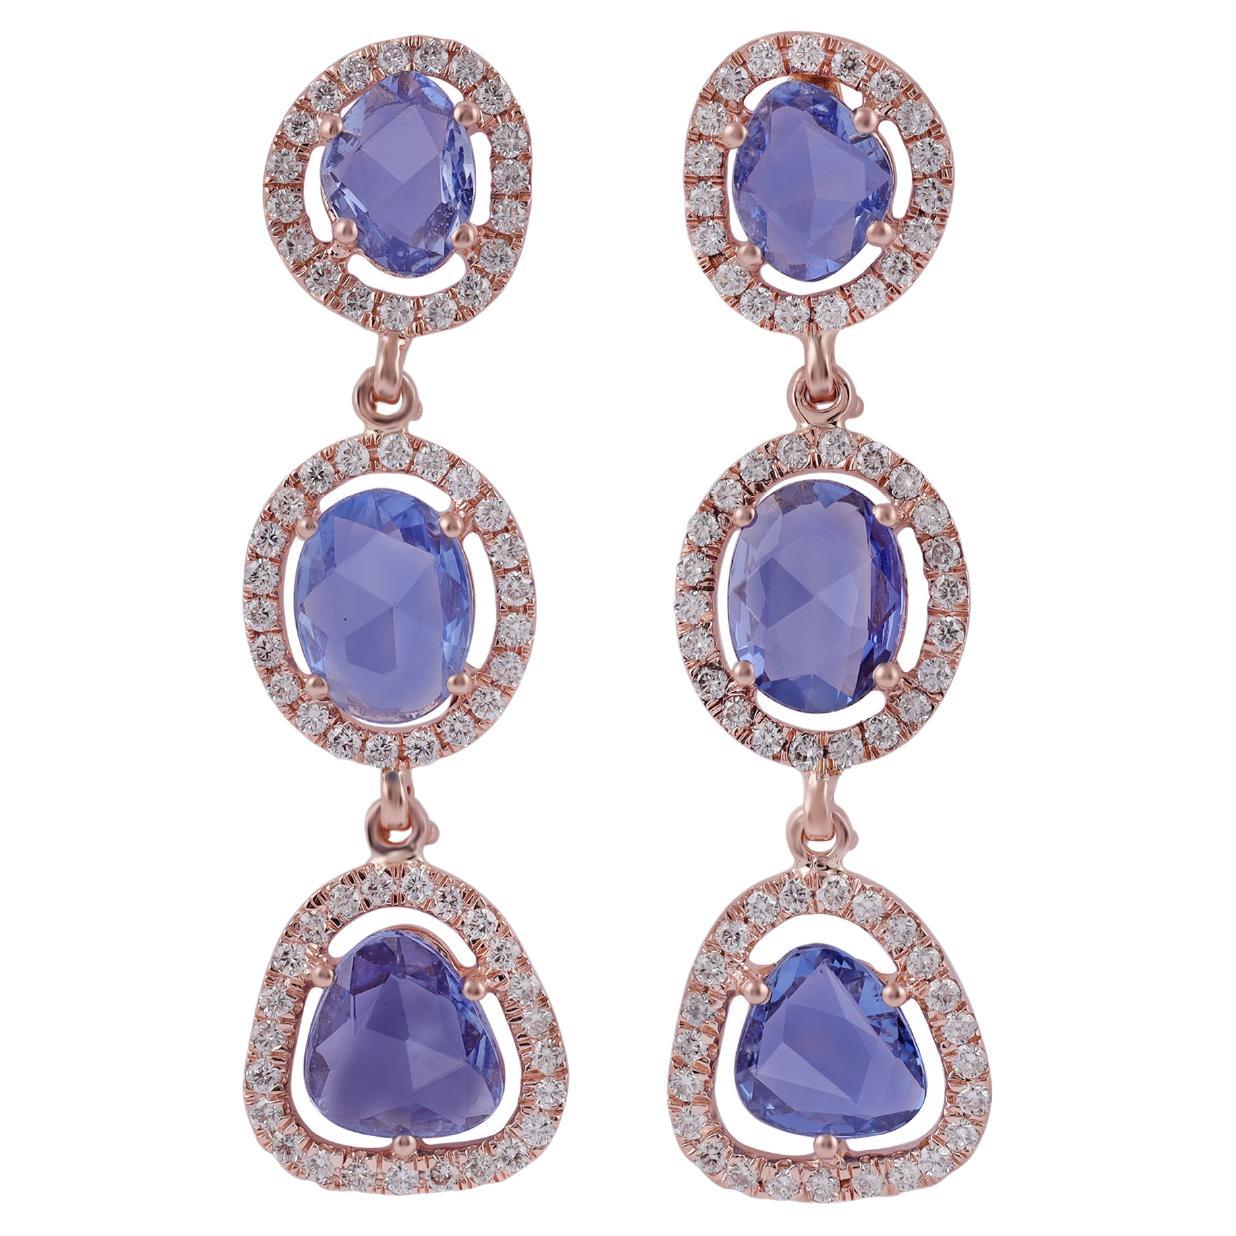 Blue Sapphire and Diamond Earring Studded in 18 Karat Rose Gold